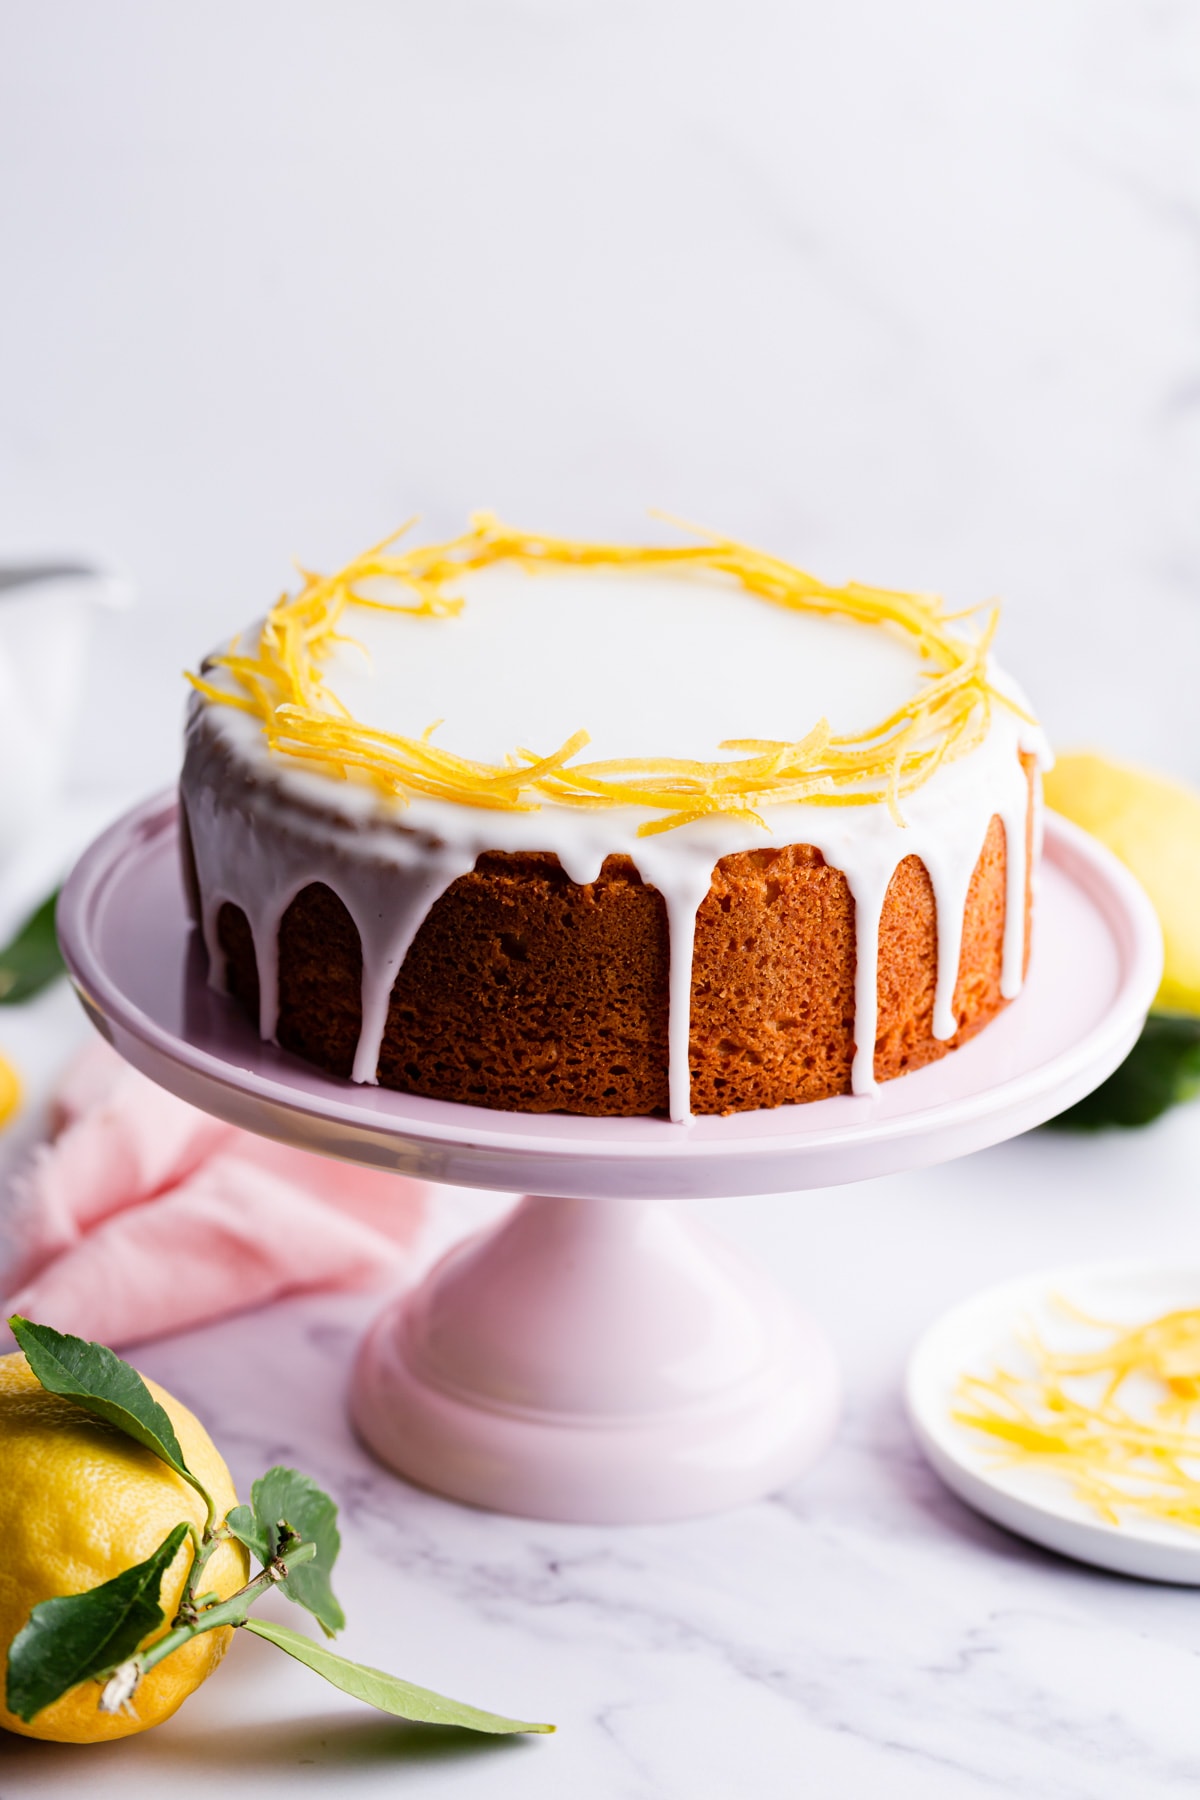 citrus sponge cake decorated with white icing dripping from the sides of it.